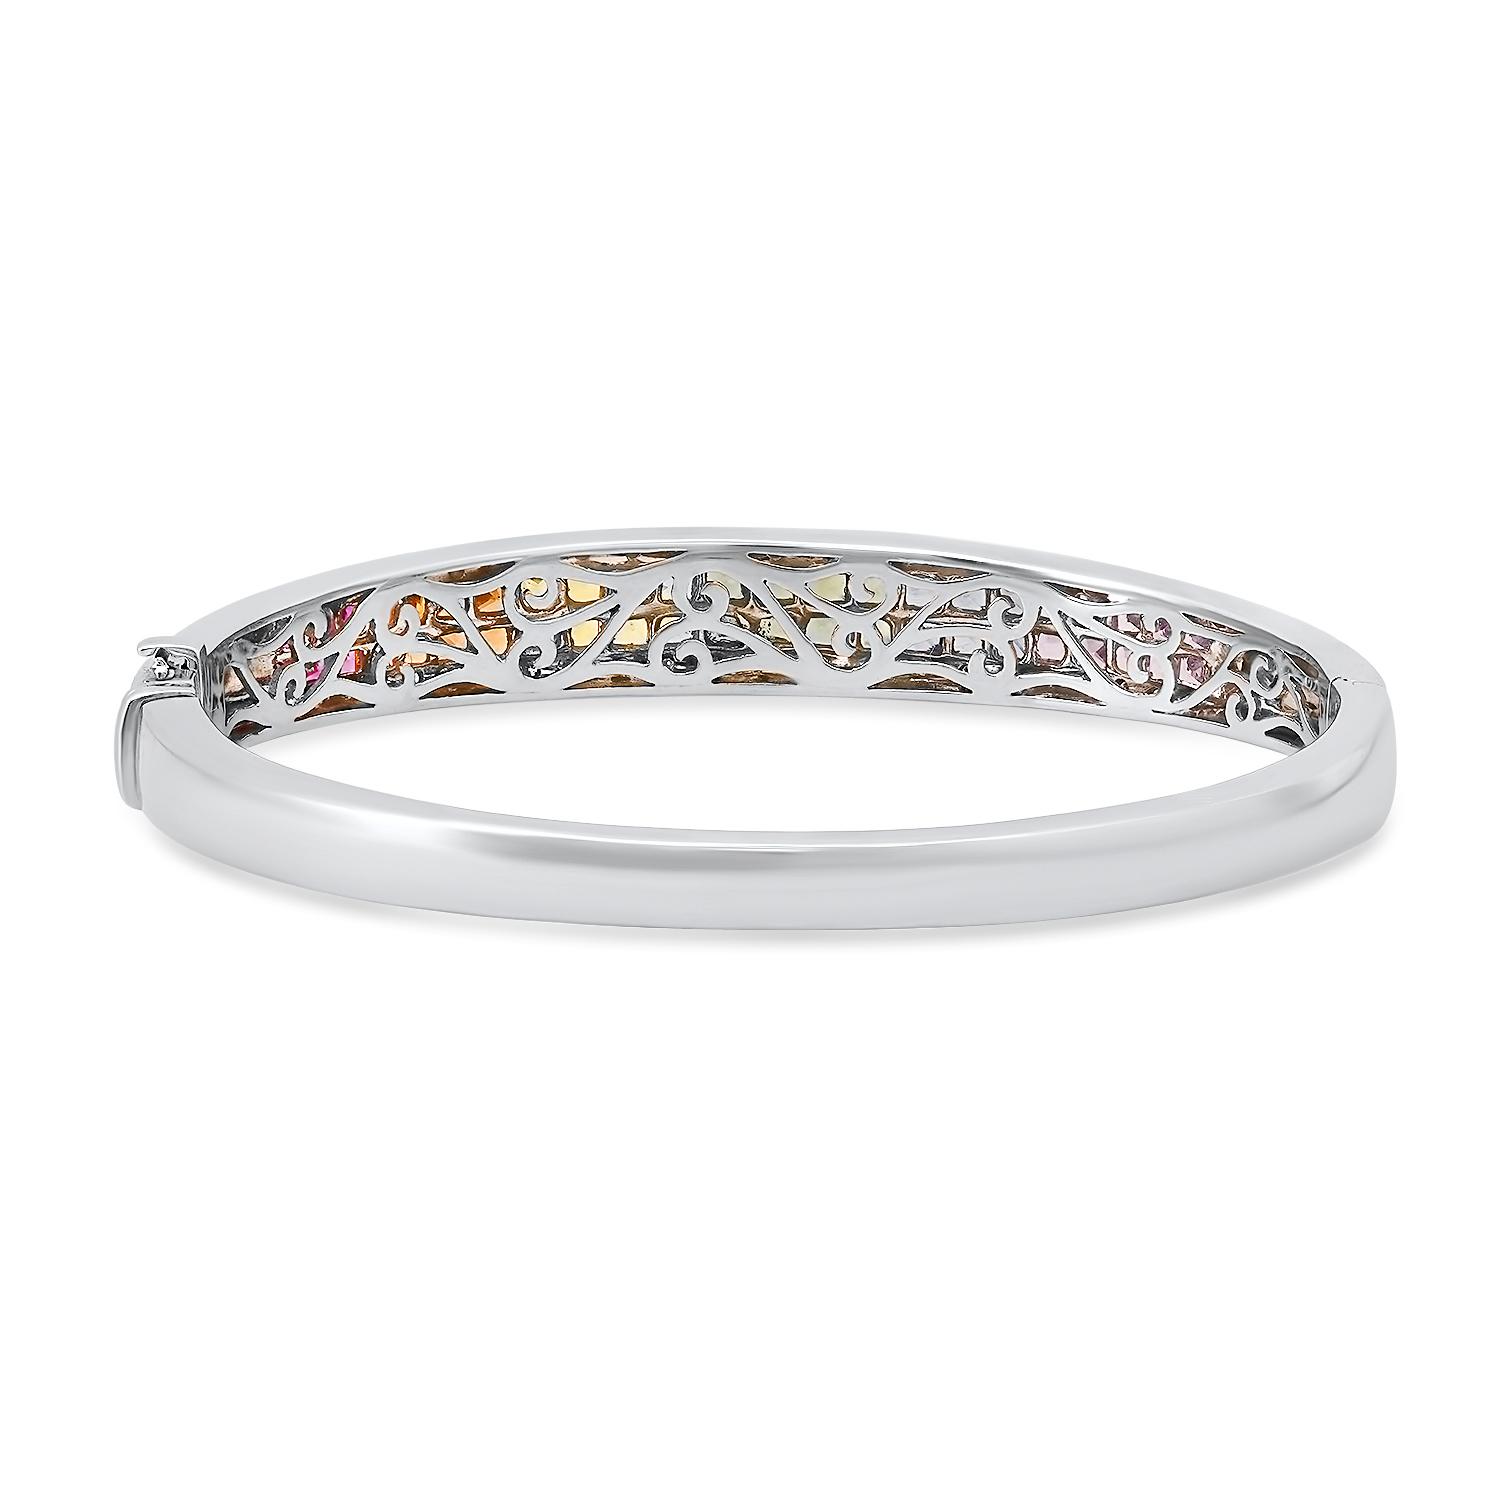 14K White Gold Setting with 4.11ct Multi Colored Sapphire and 0.36ct Diamond Bangle Bracelet